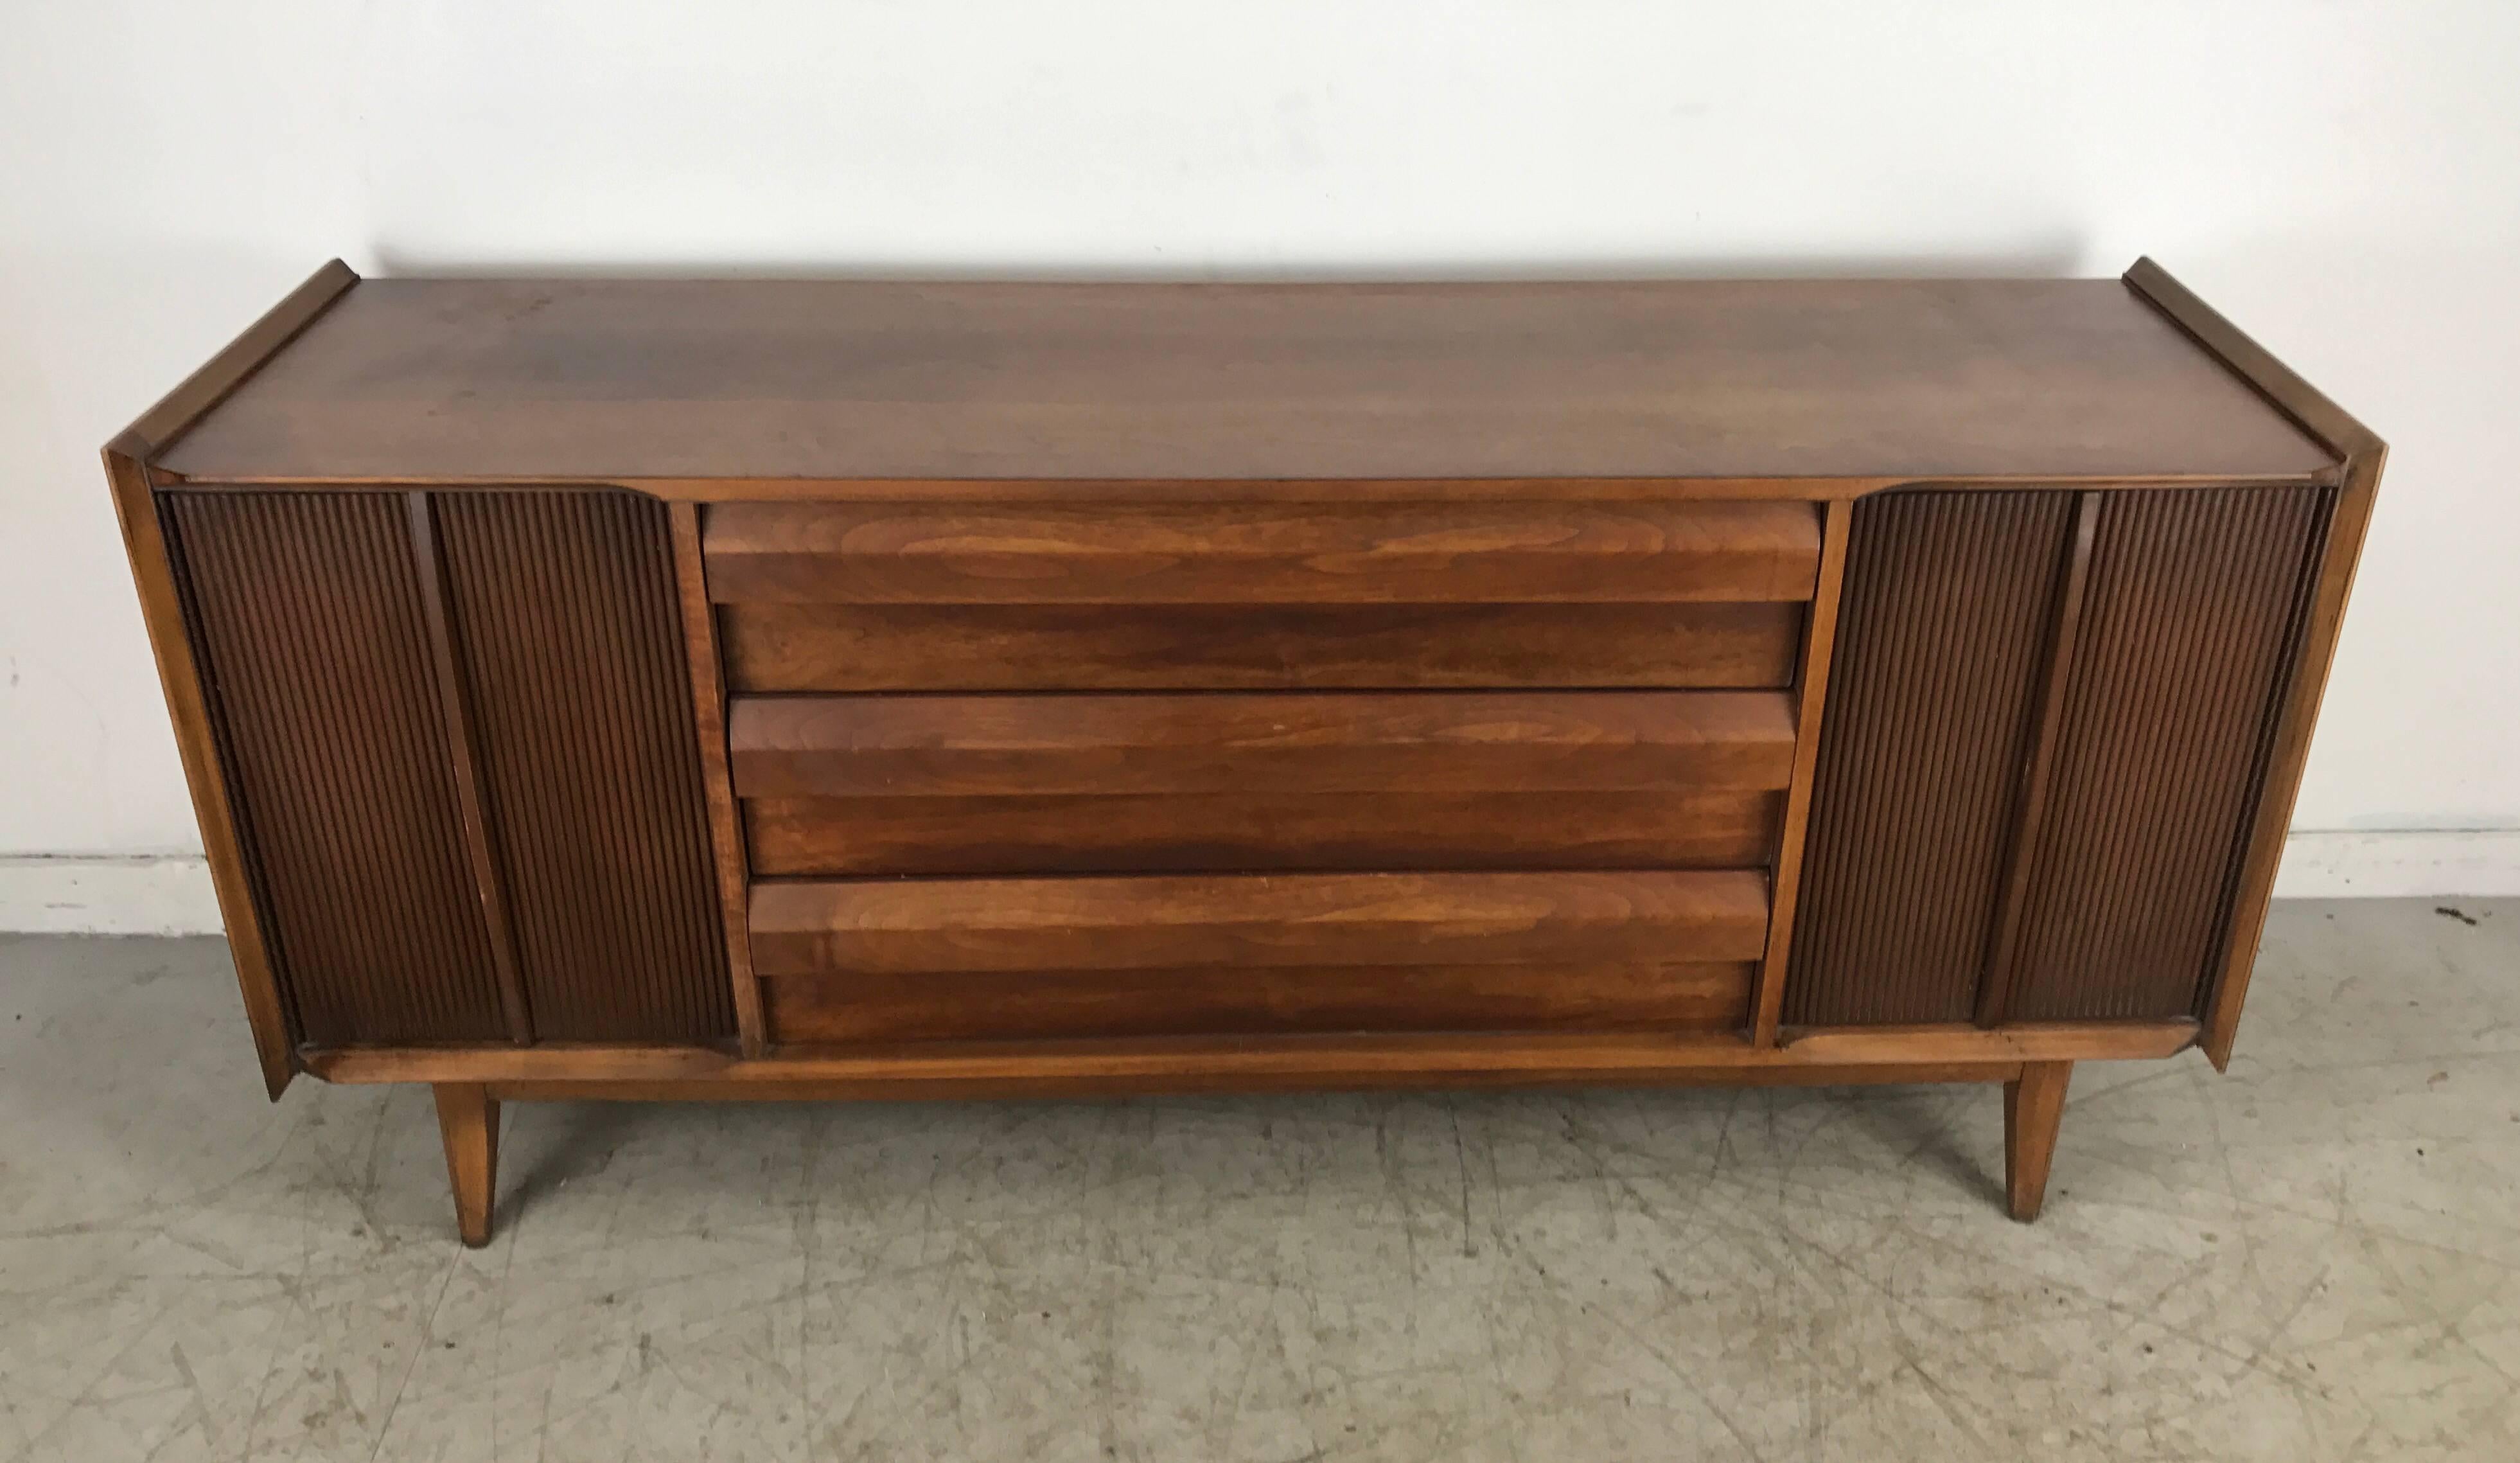 Modernist Server/Credenza,two-tone walnut finish,Made by LANE furniture company. Beautiful figured walnut, ribbed walnut doors. Handsome,elegant styling,Classic modernist design featuring three generous size drawers, left and right storage. Also